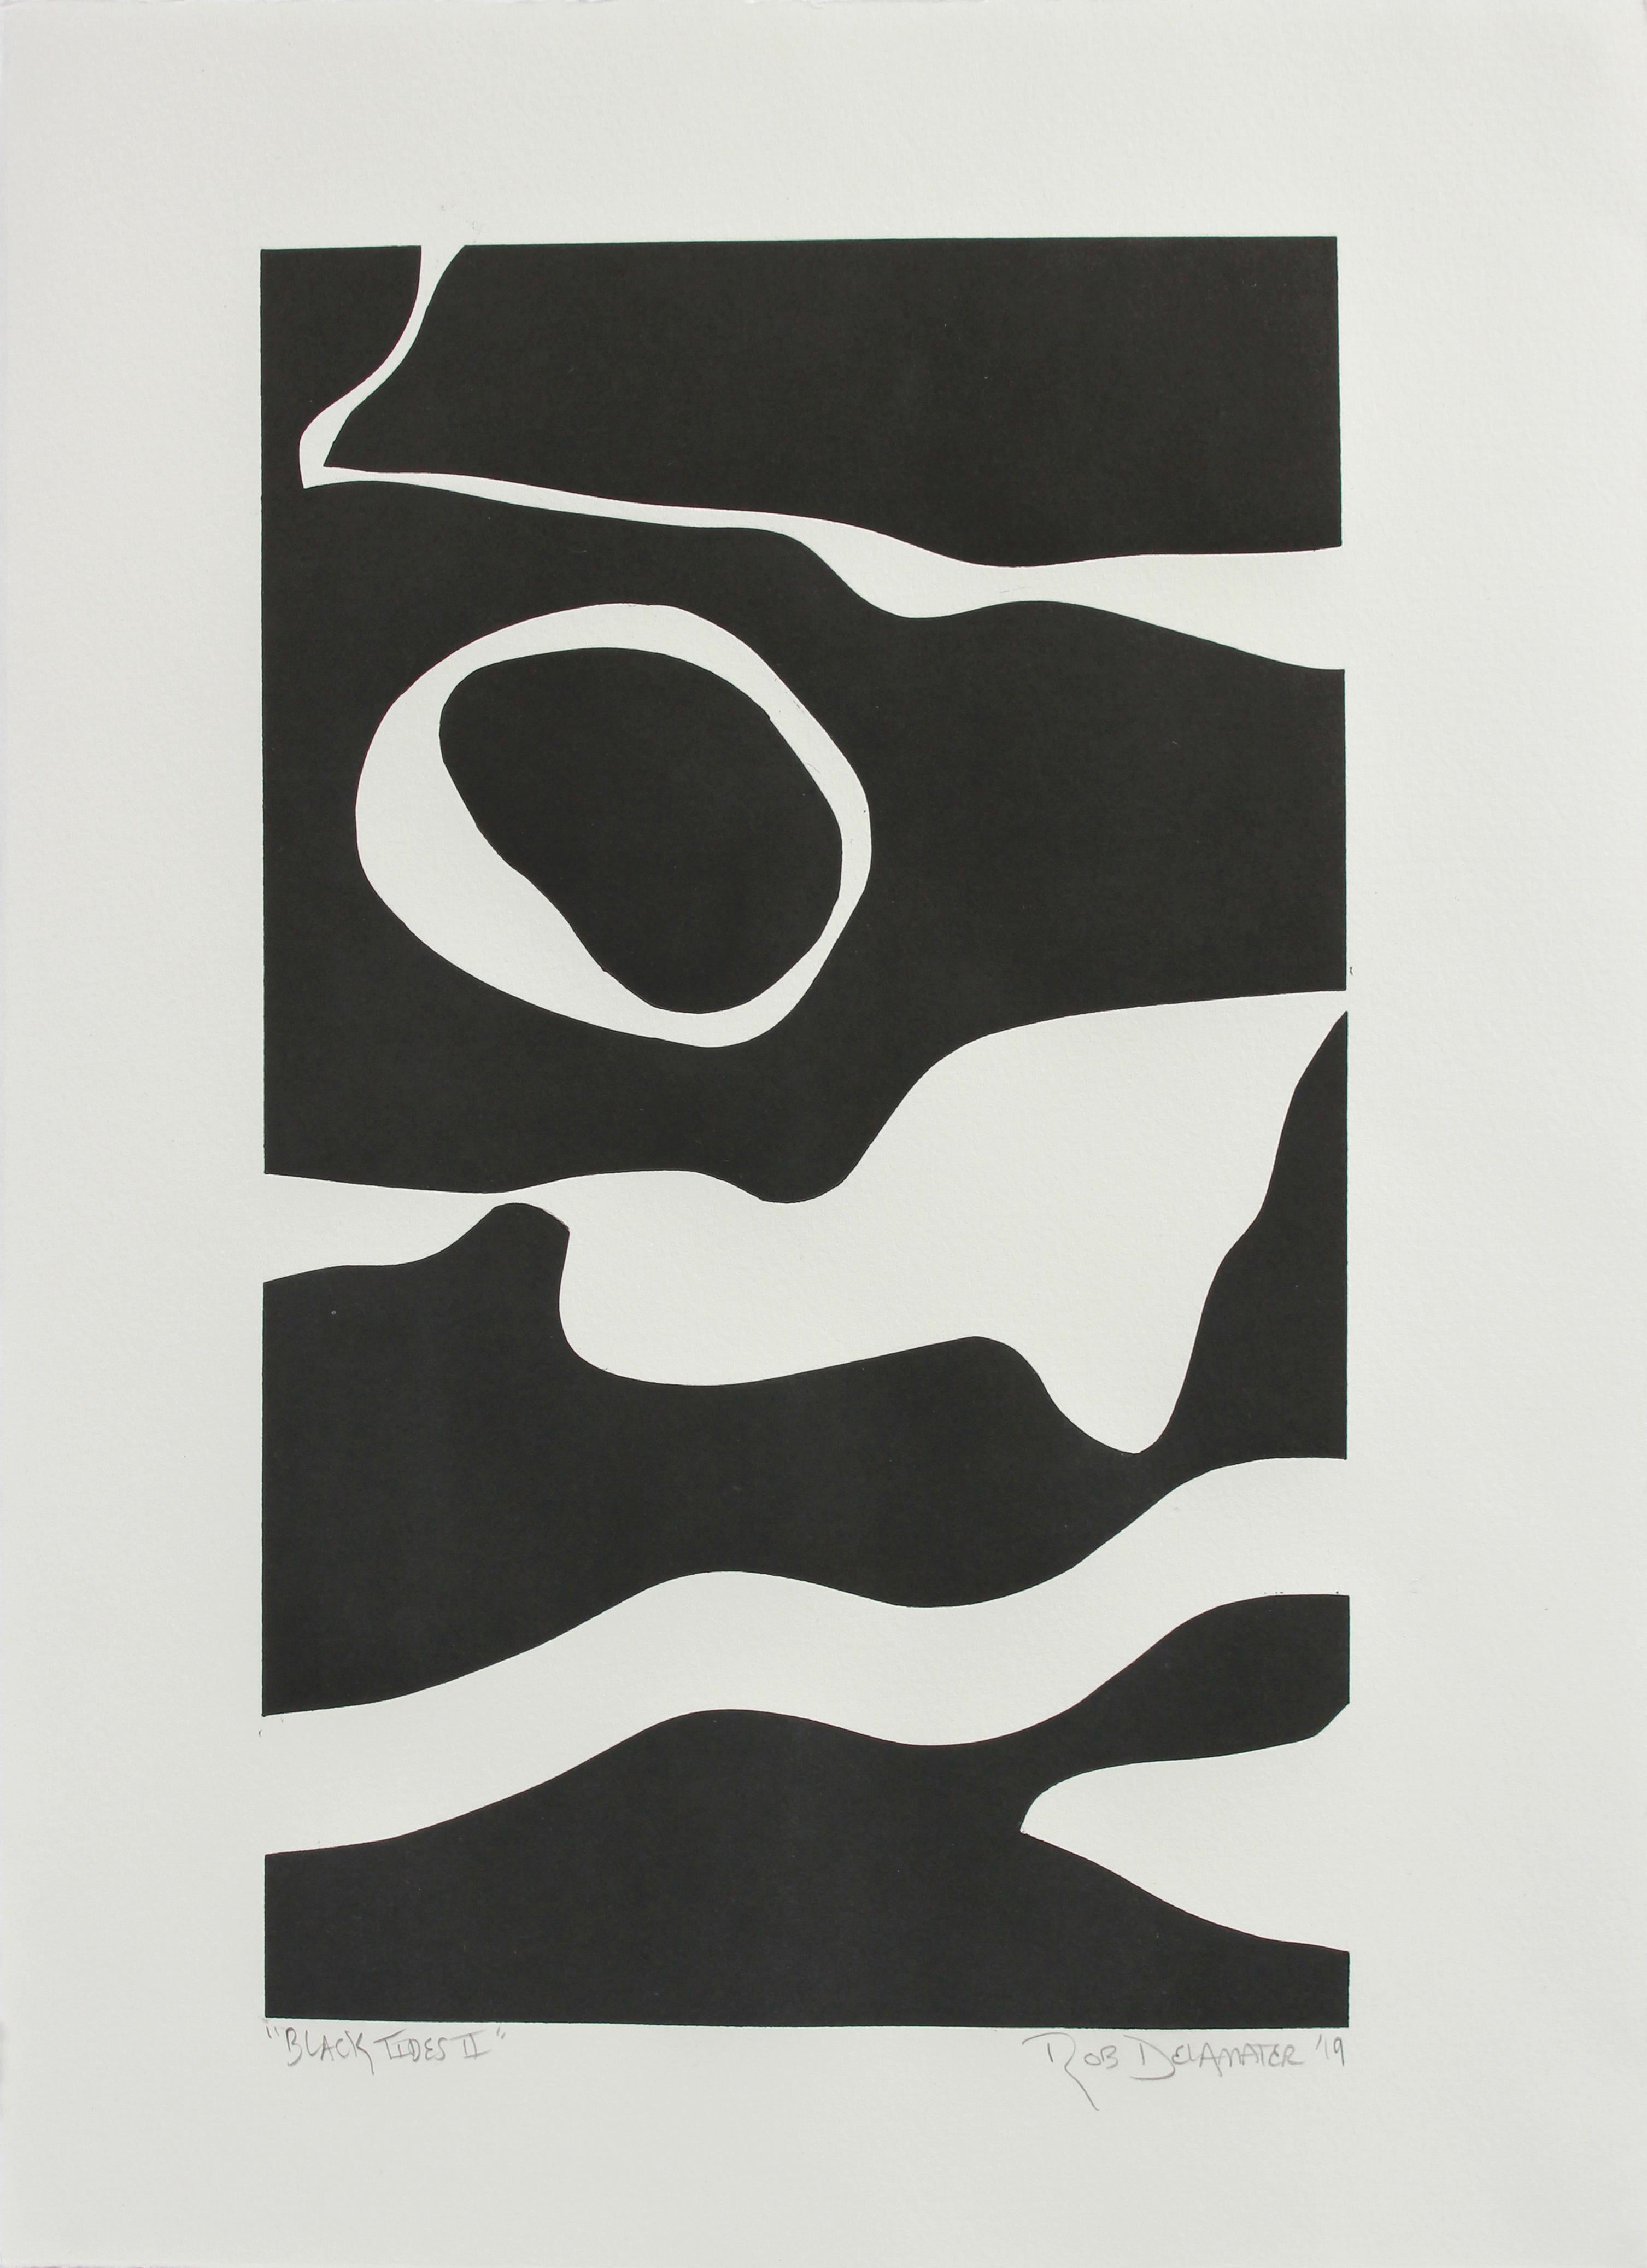 This 2019 monotype on paper diptych of abstracted tides in black and white entitled 